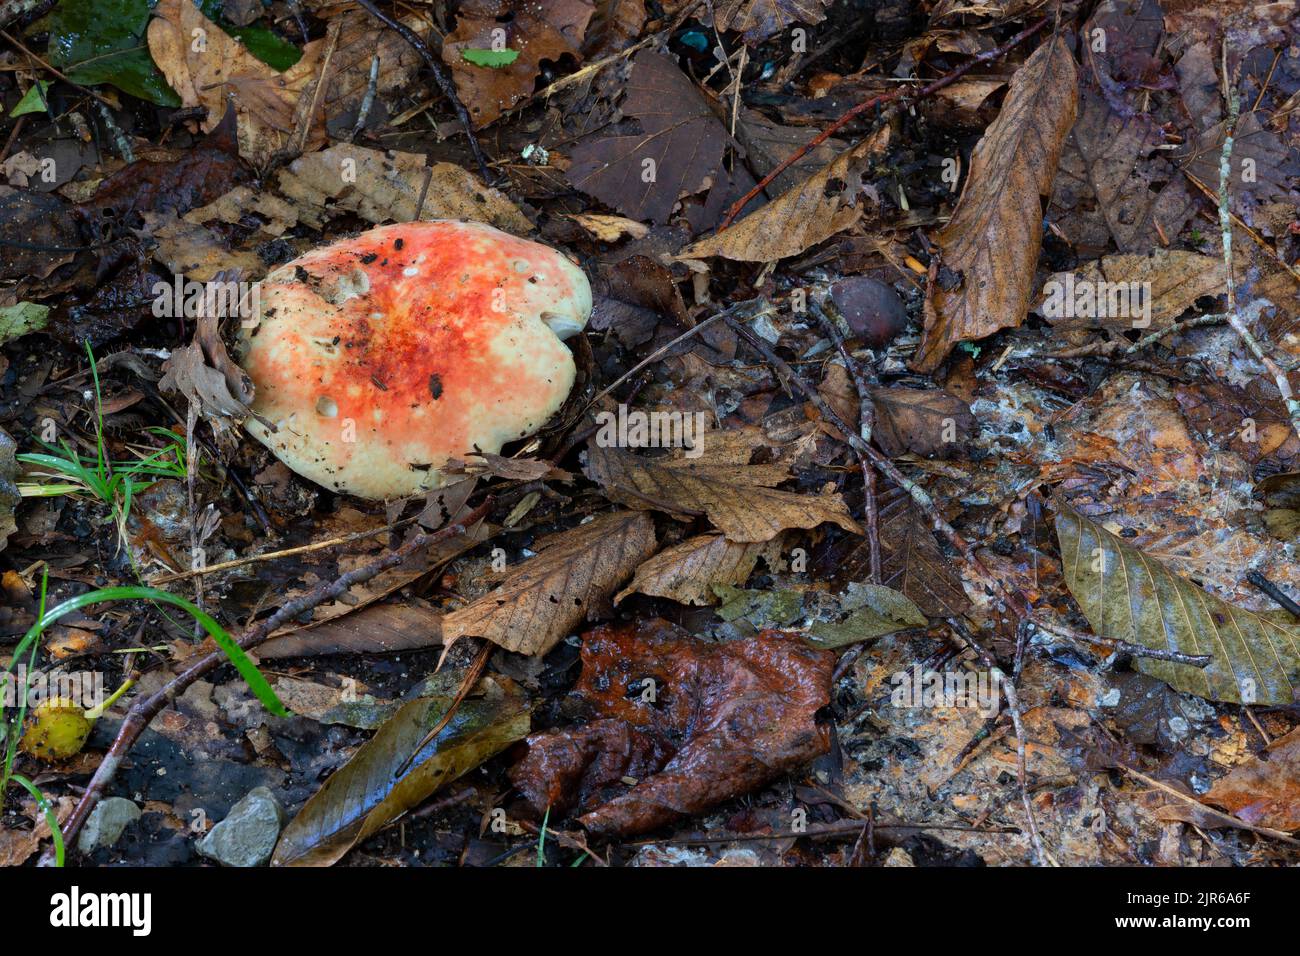 A close up of a mushroom growing and nourish from decaying leaves. Stock Photo